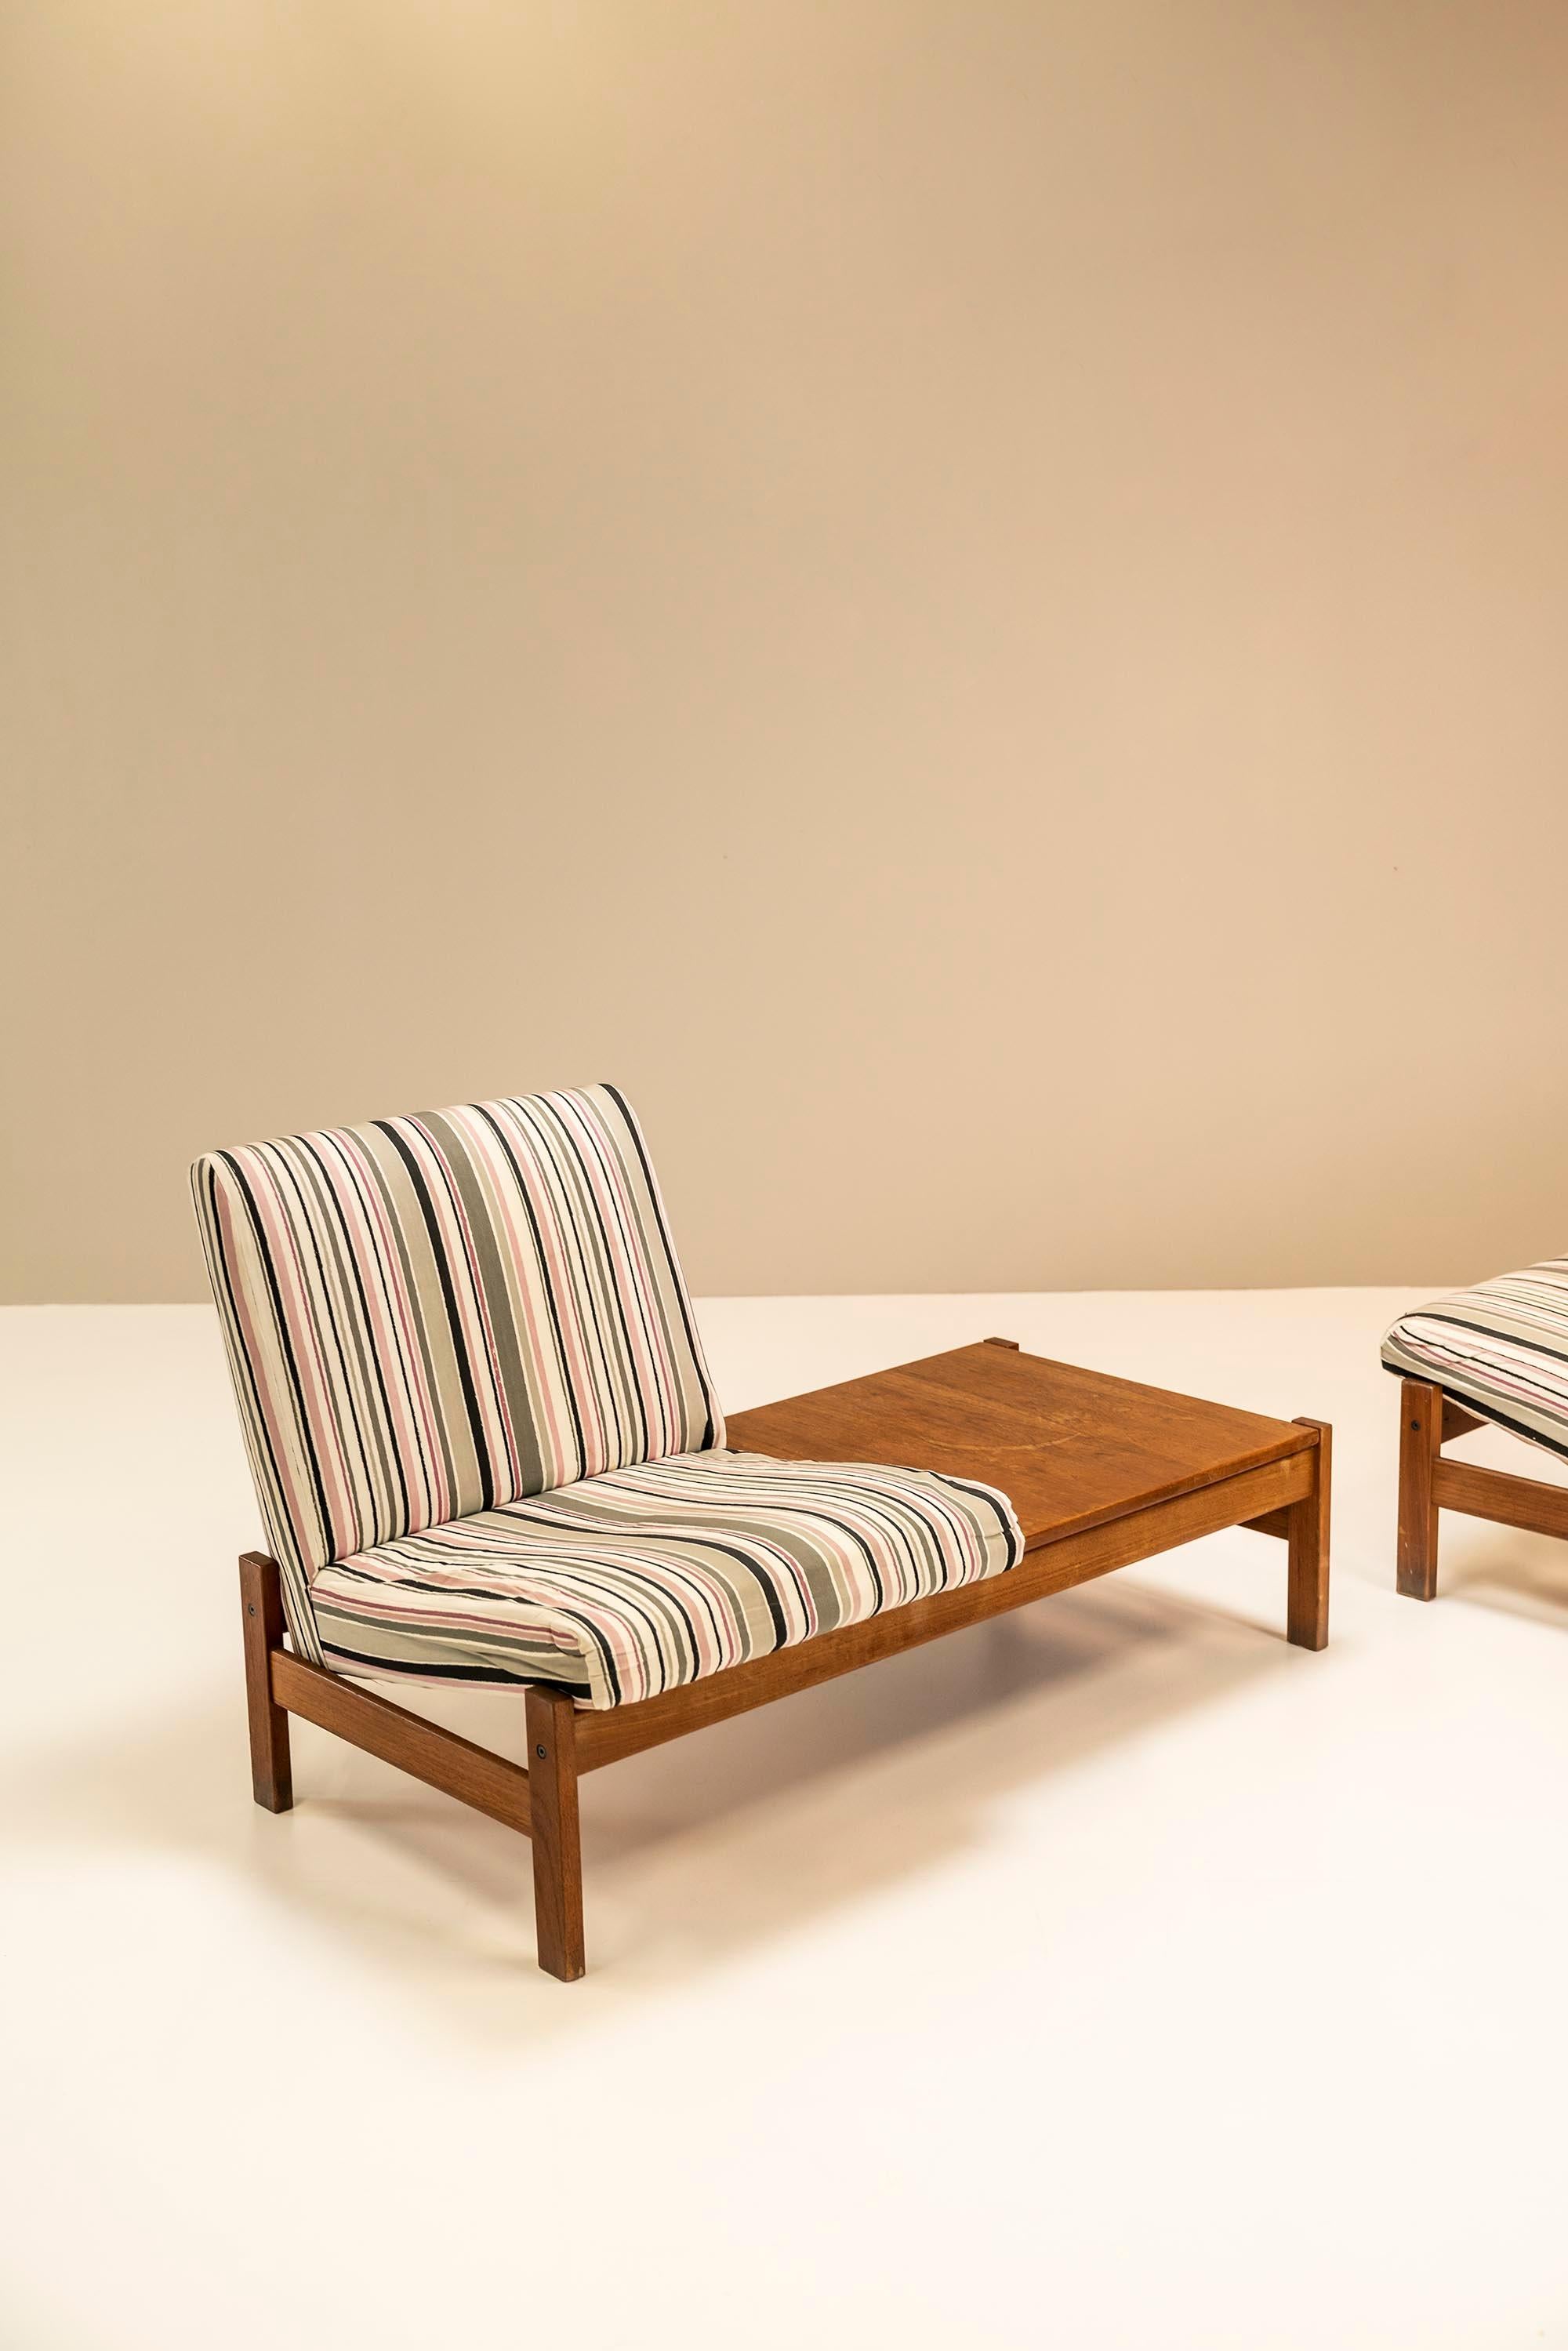 Modular Bench Set in Teak and Original Upholstery, Italy, 1960s For Sale 8